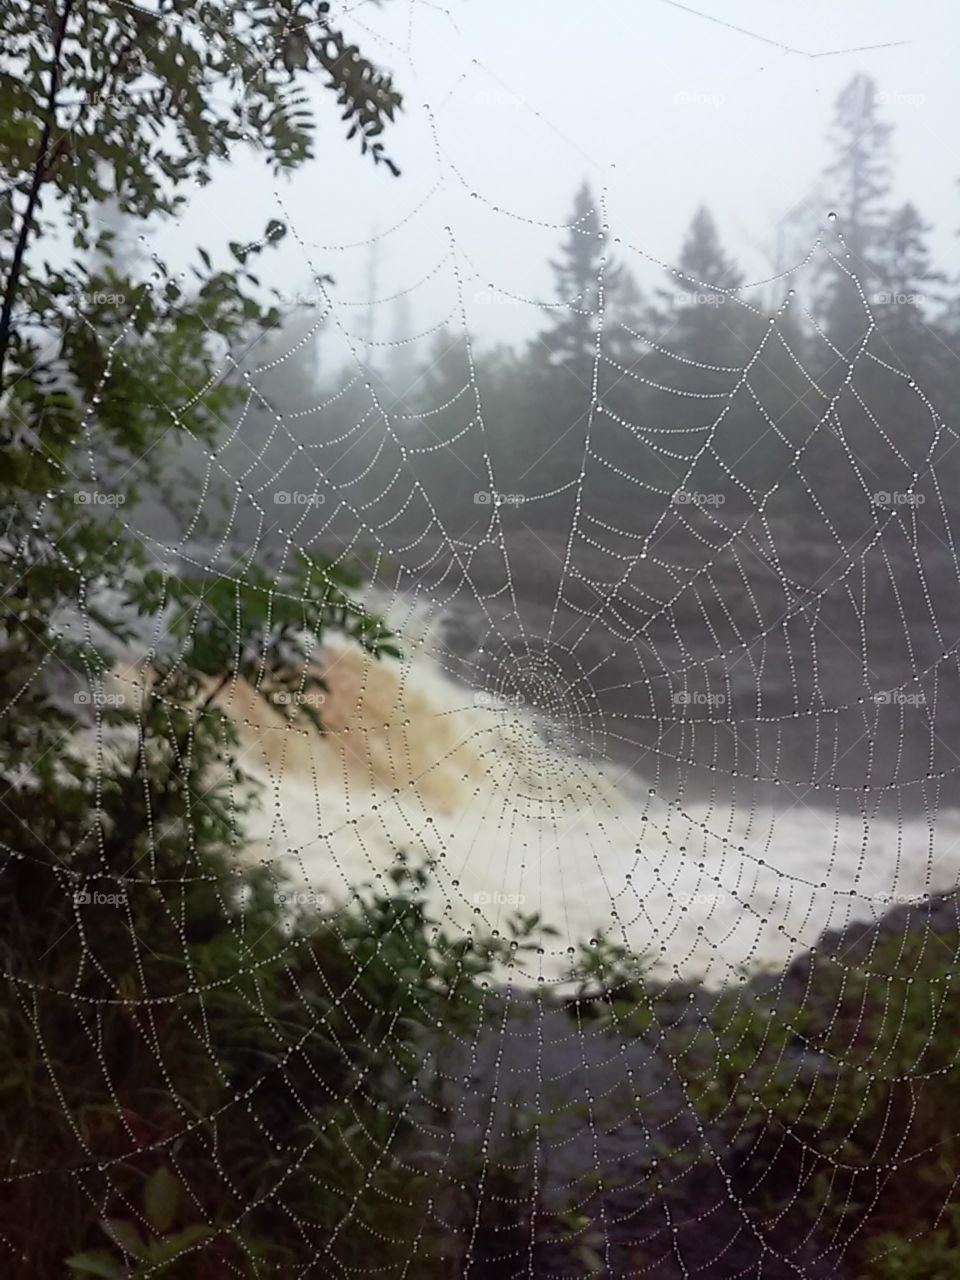 spider web and falls. spider web on bridge overlooking Temperance River